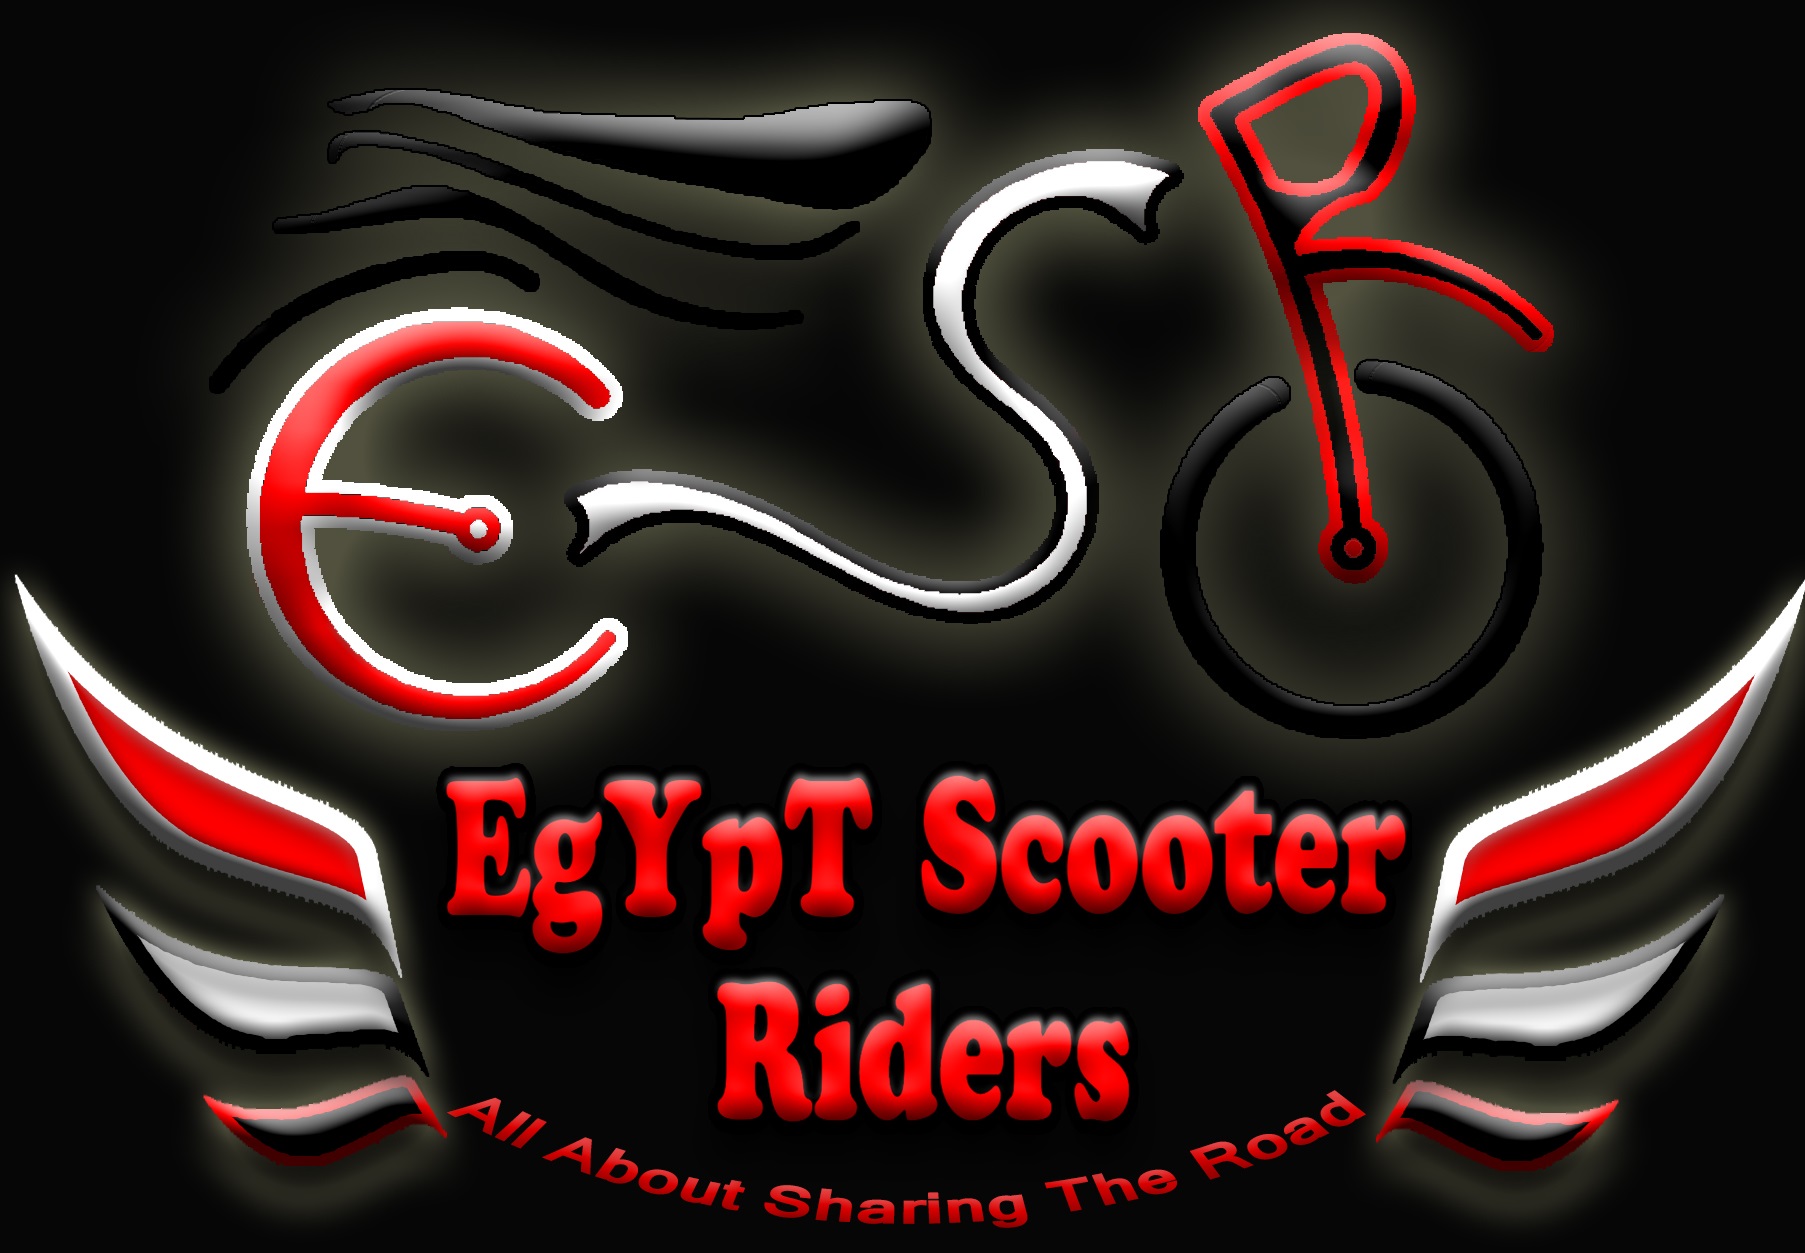 EgYpT Scooter Riders